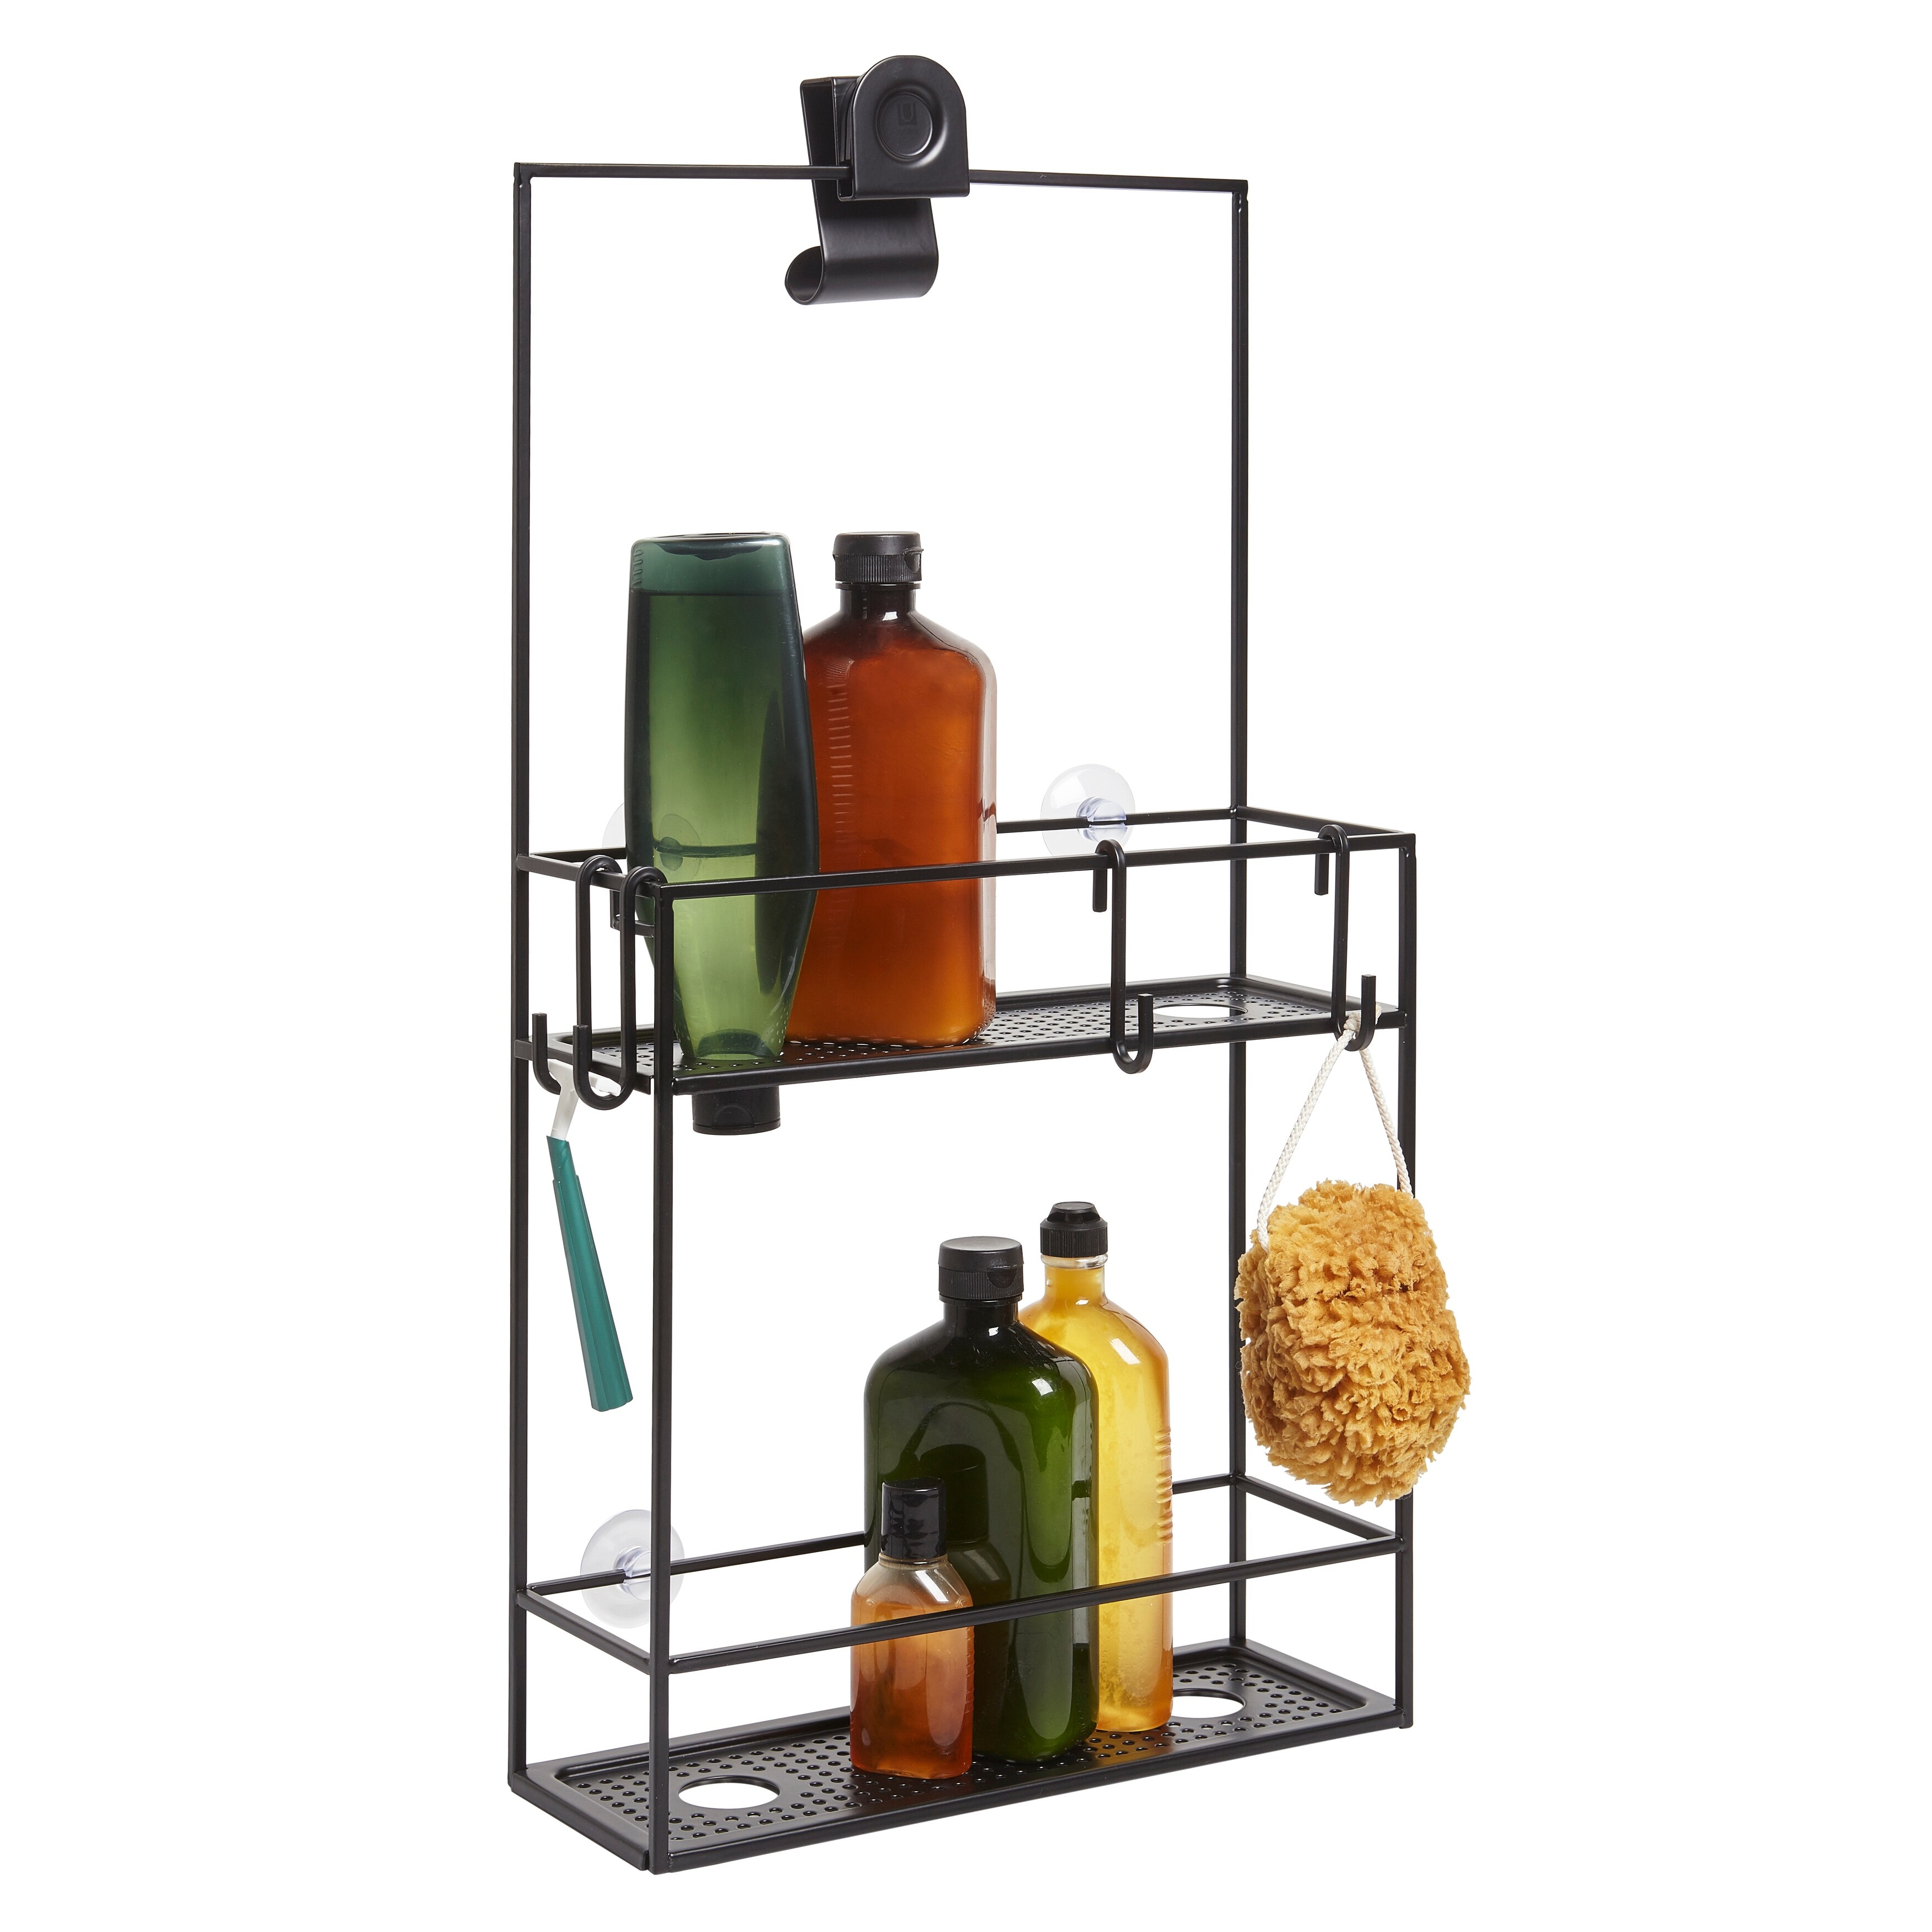 https://ak1.ostkcdn.com/images/products/is/images/direct/fac6a4e72fe823dc4c56c2d9354a1fa2b73dcef7/Umbra-CUBIKO-Shower-Caddy.jpg